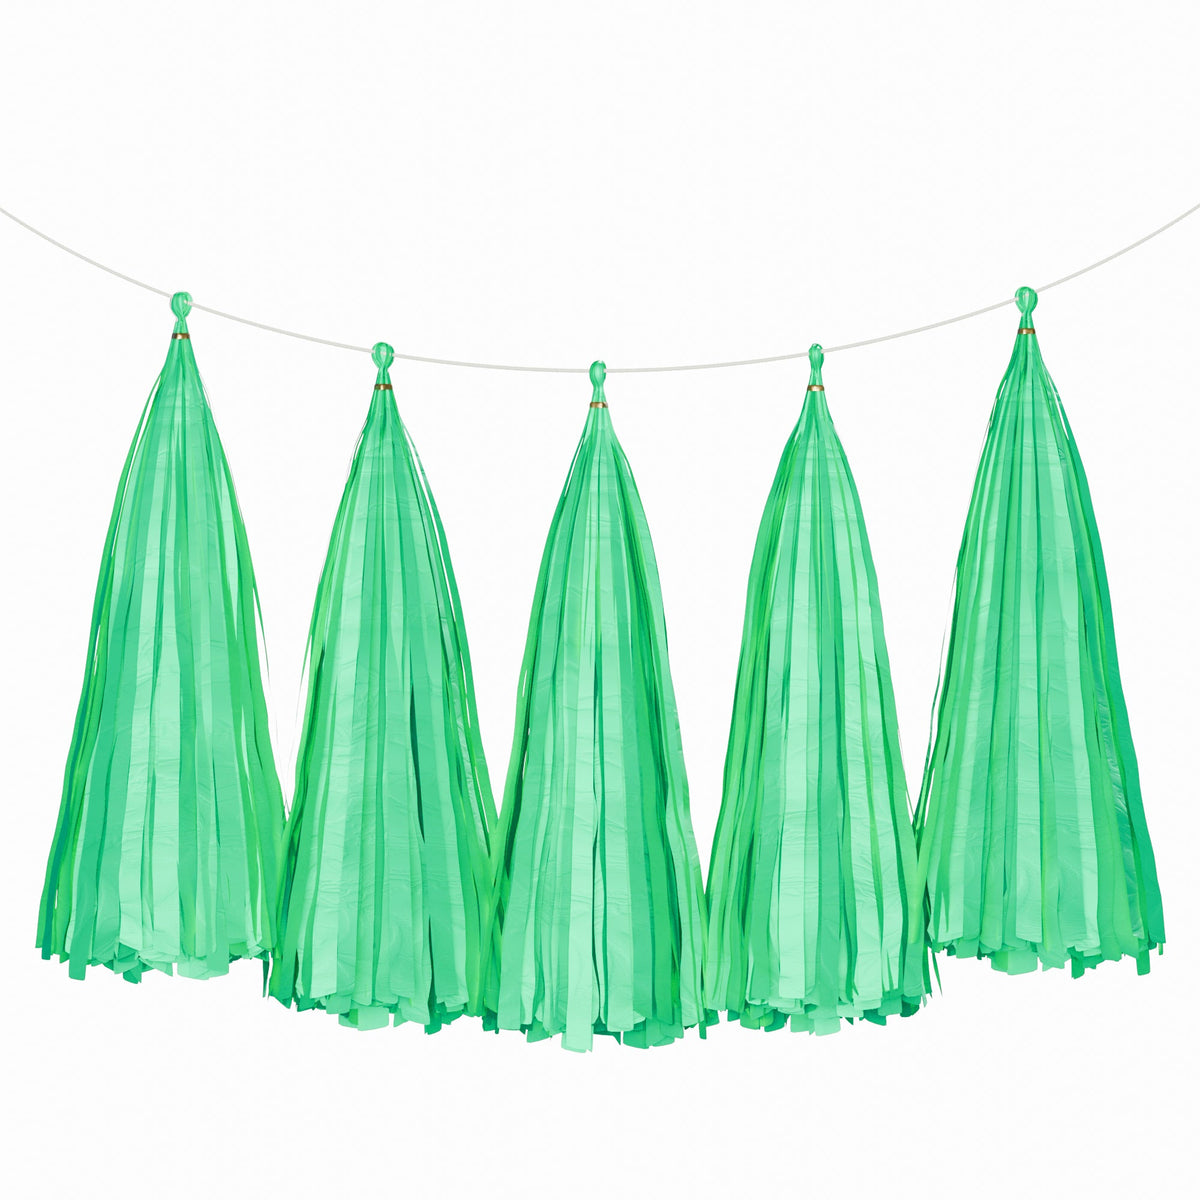 Weifang Mayshine Imp&exp co Decorations Mint Green Tassel Garland, 5 Count 810064197239